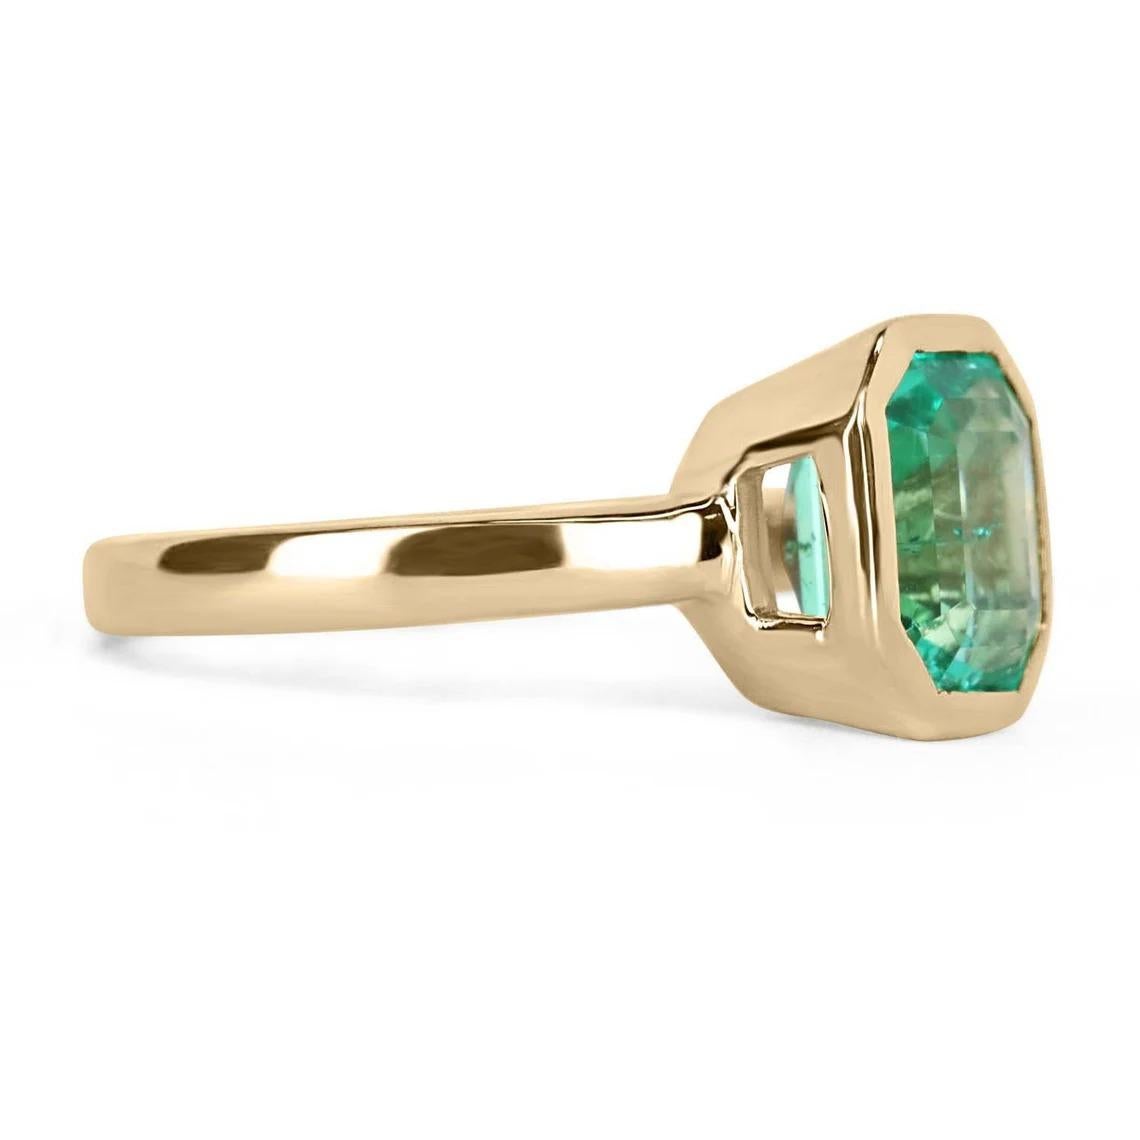 Displayed is a bluish-green Colombian emerald, solitaire, emerald-cut bezel ring in 18K yellow gold. This gorgeous solitaire ring carries a full 2.06-carat emerald in a sleek bezel setting. The emerald has very good clarity and luster, with minor